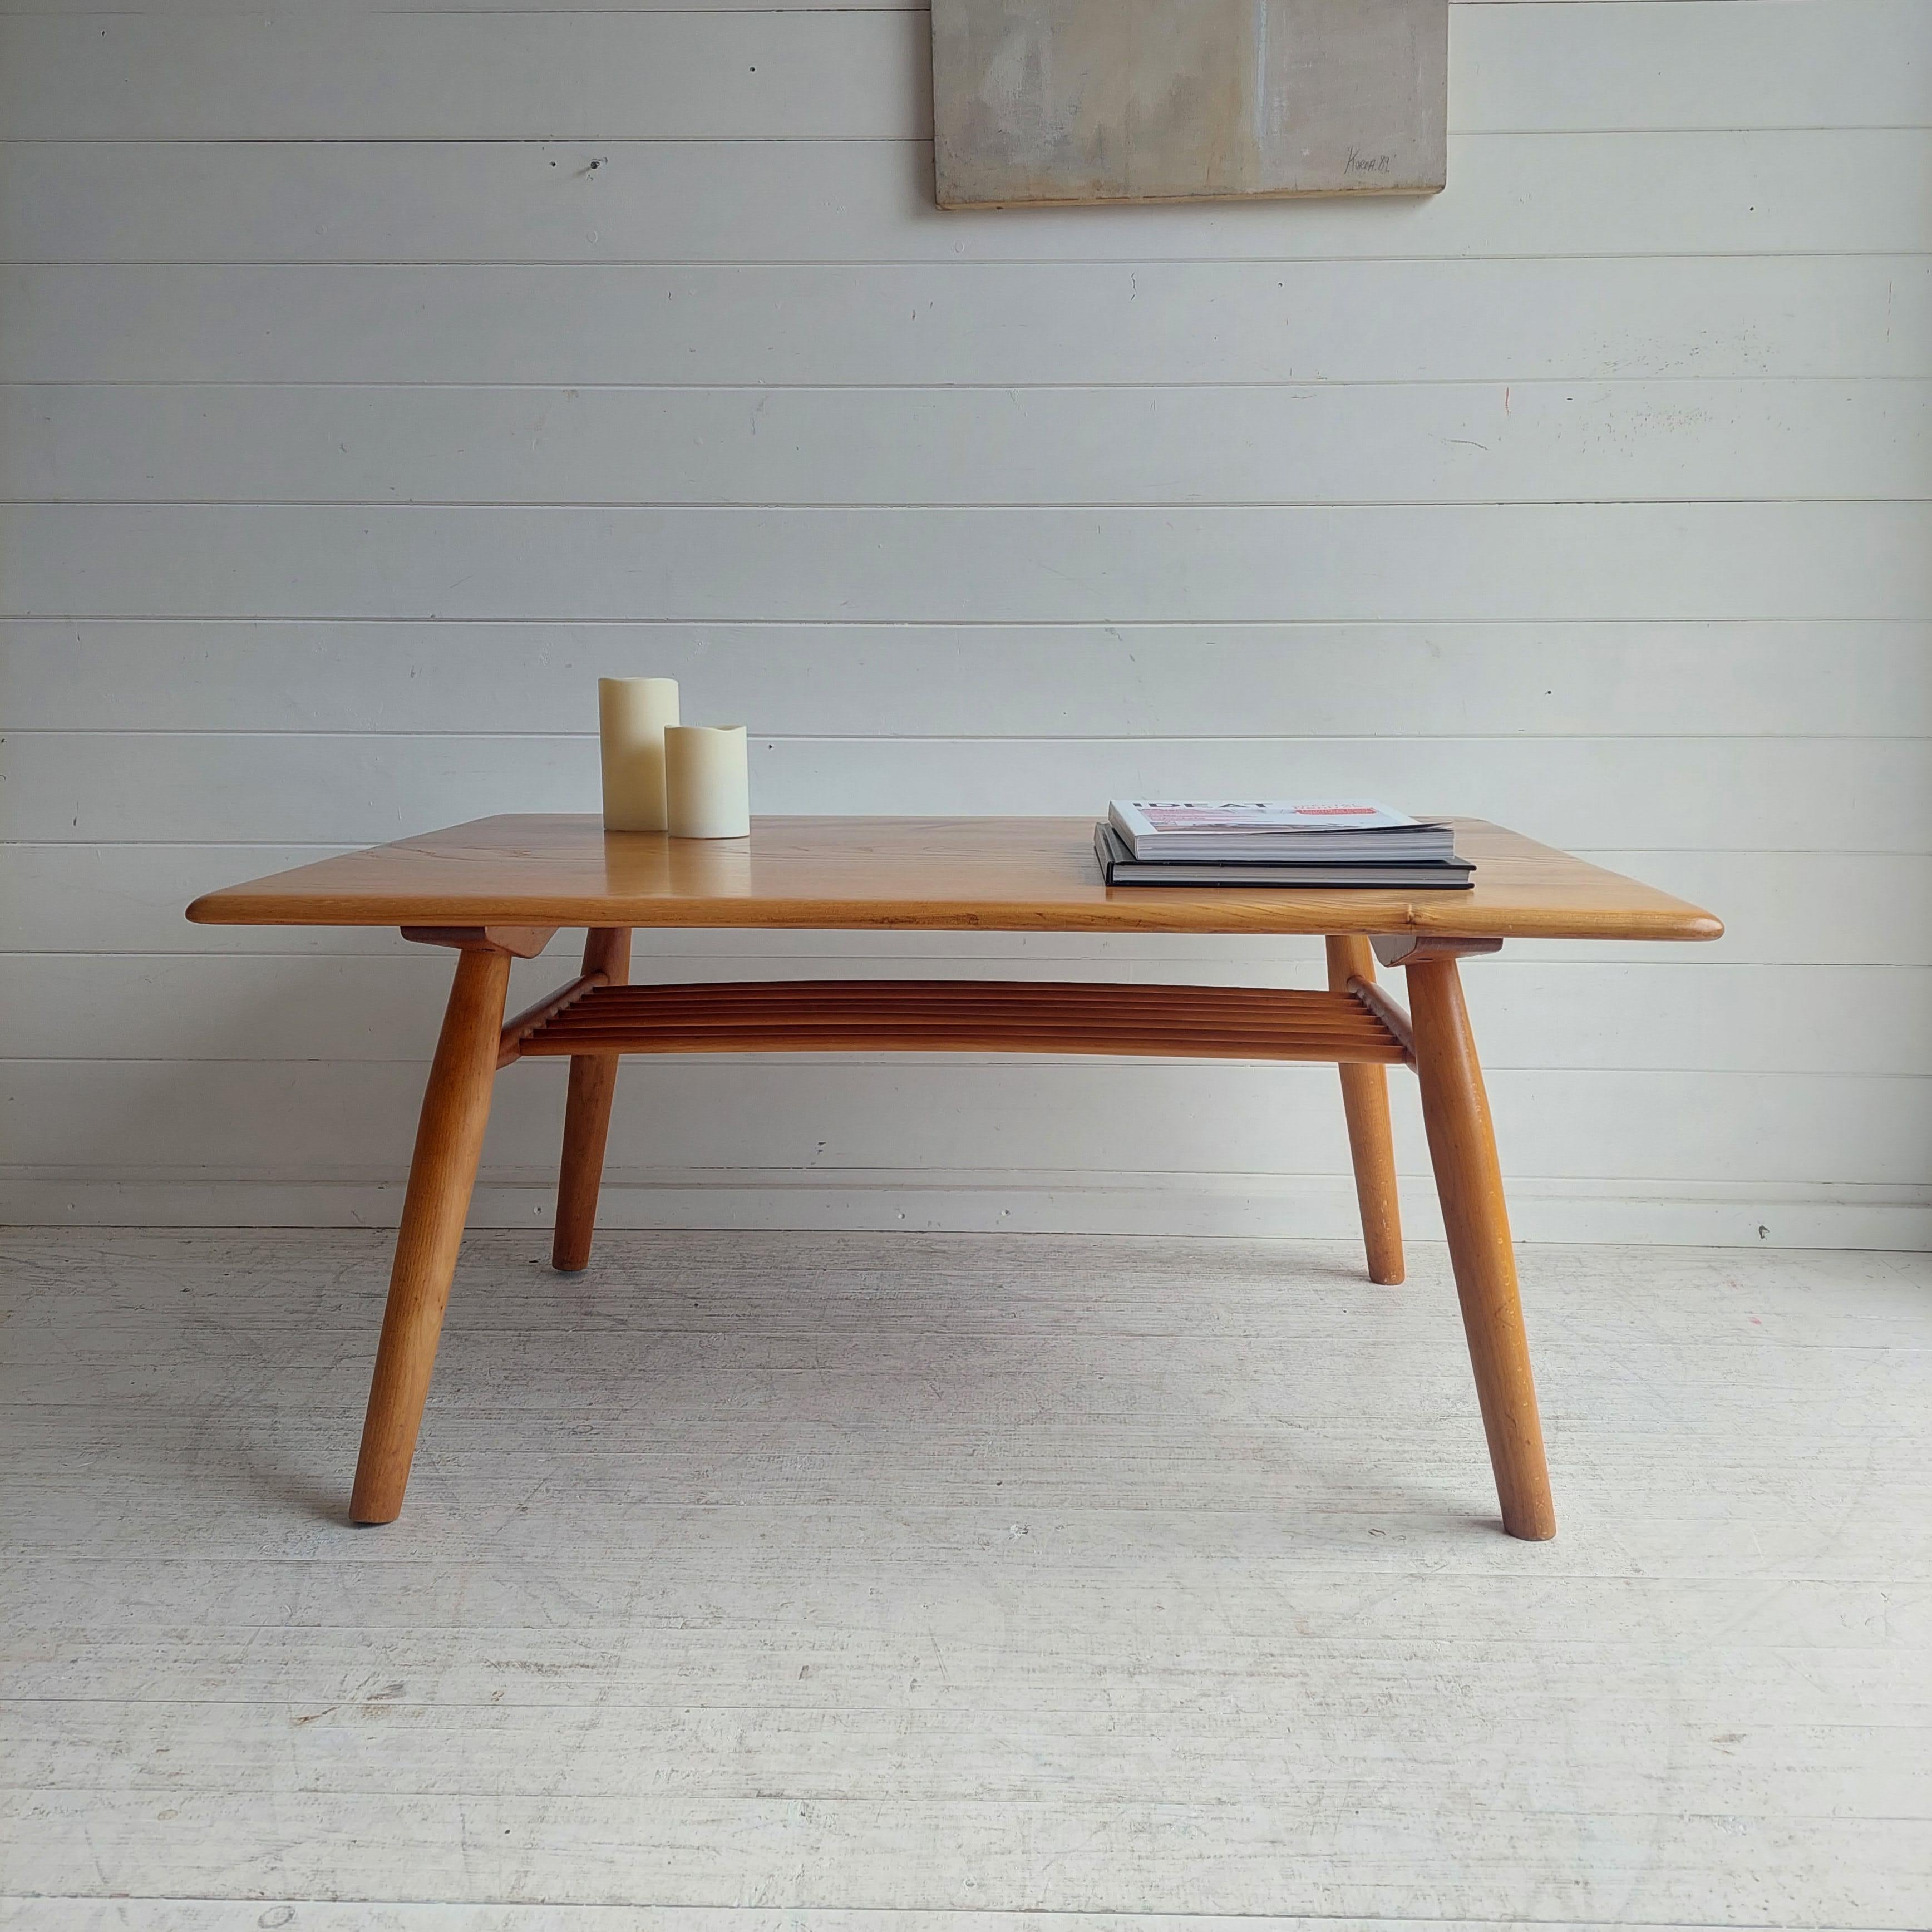 Unique repurposed Rare model 393 breakfast table into a coffee table.
Designed by Lucian Ercolani in the 1950/60s for Ercol.

Desirable rectangular coffee table with rounded edges and functional spindle wood magazine shelf underneath.
The legs and